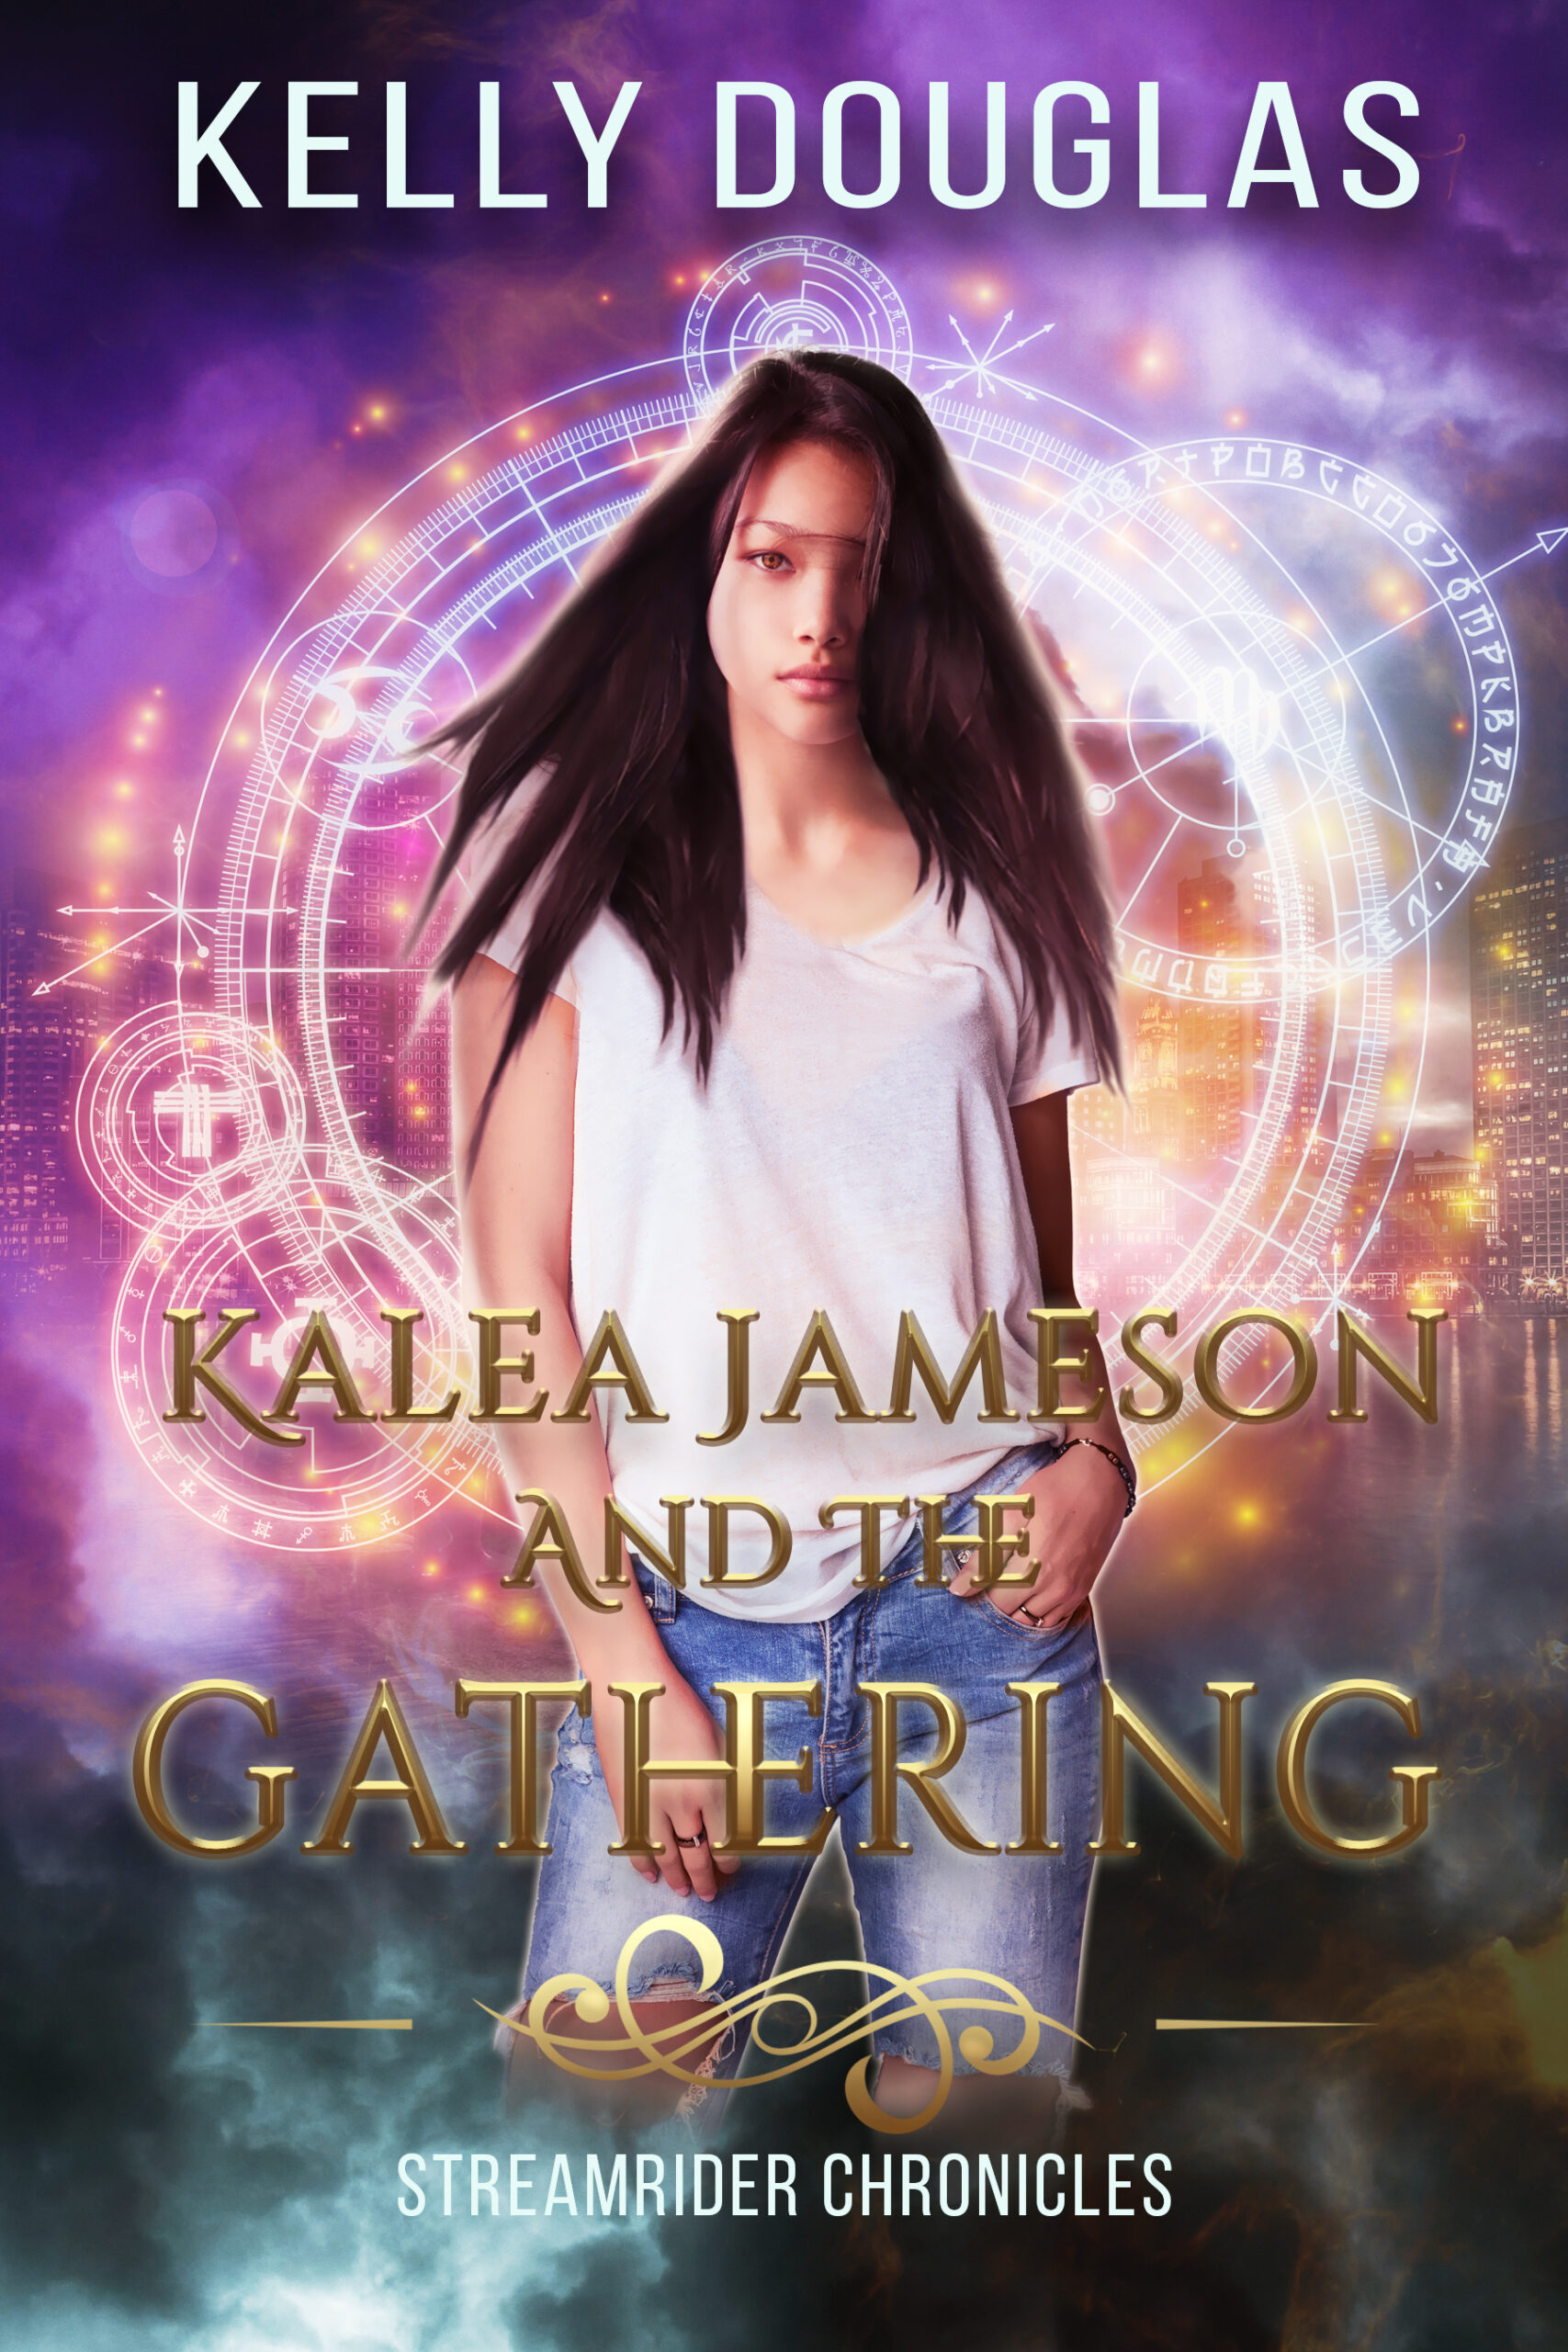 book cover of teenaged girl standing in front of blue, pink, purple clouds with sparkles of orange and gold, Kalea Jameson and the Gathering by Kelly Douglas